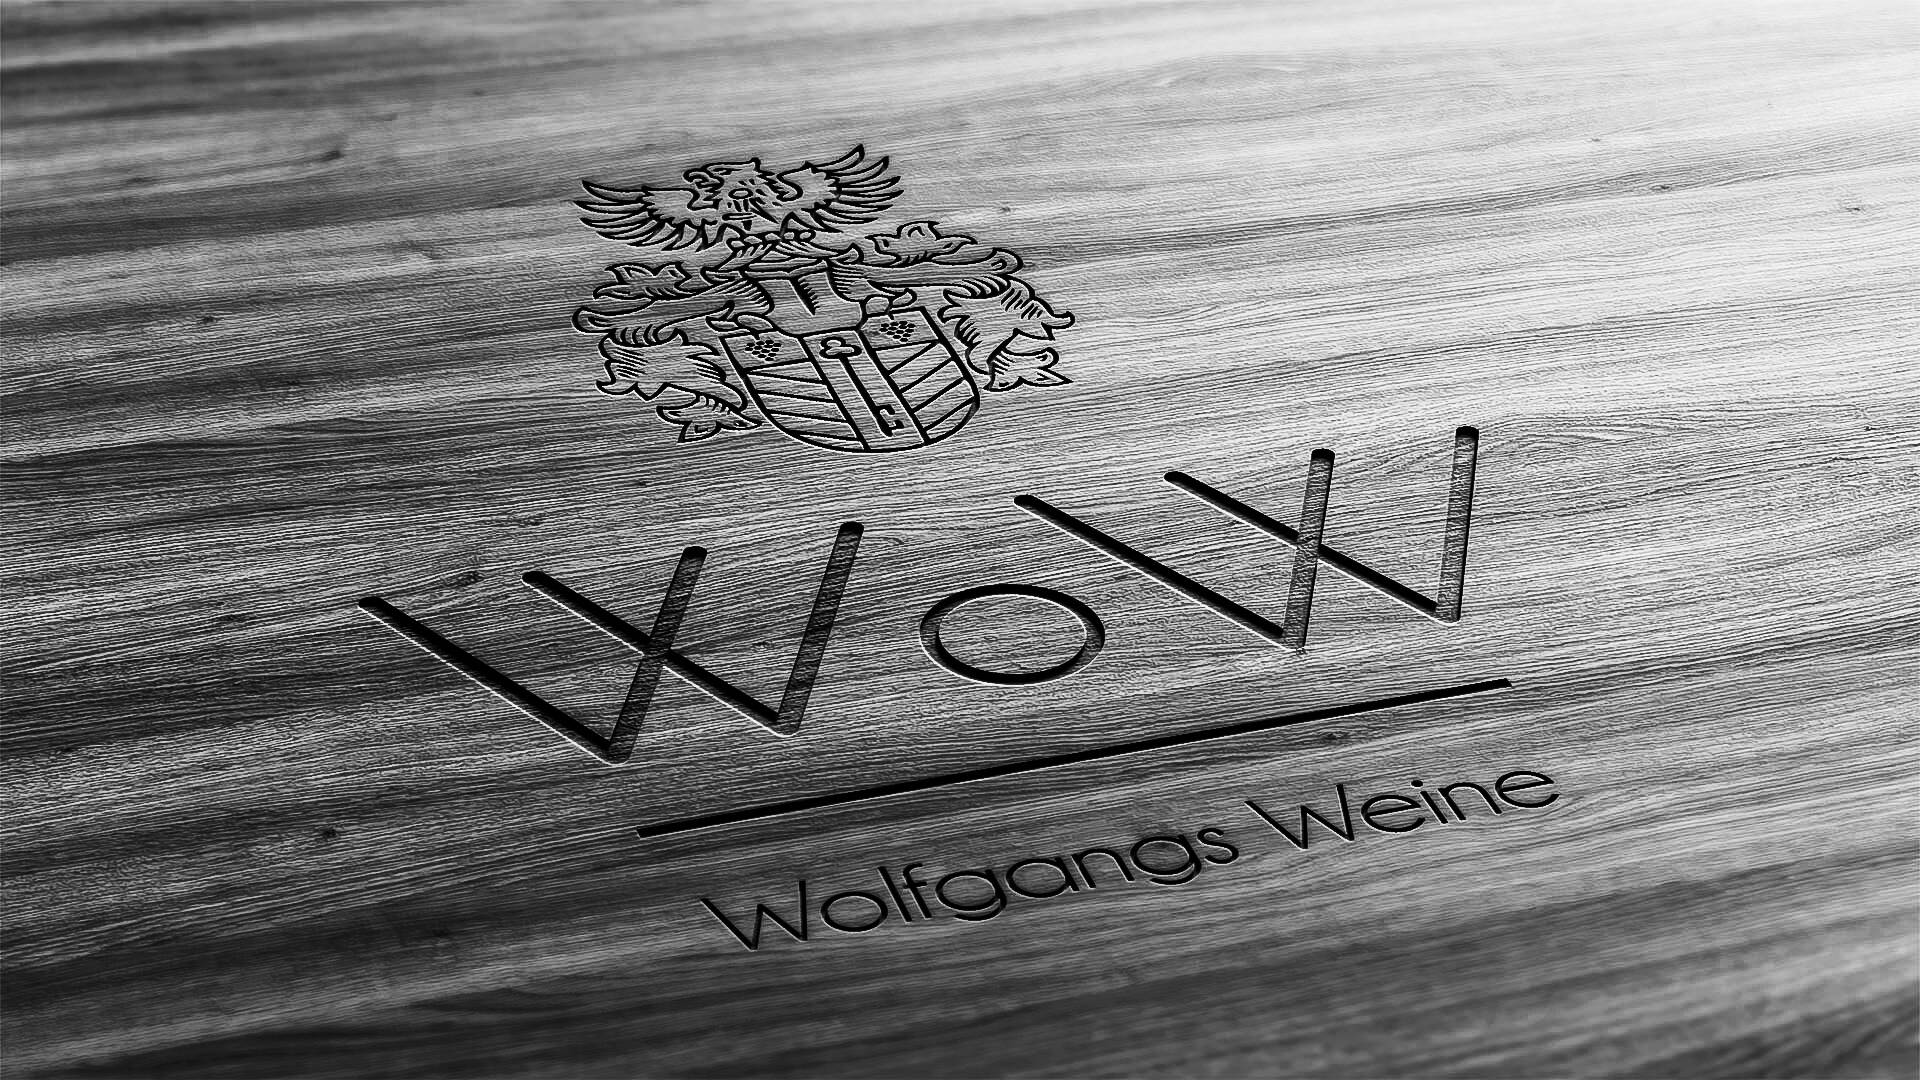 Weingut WoW by Wolfgang Bender